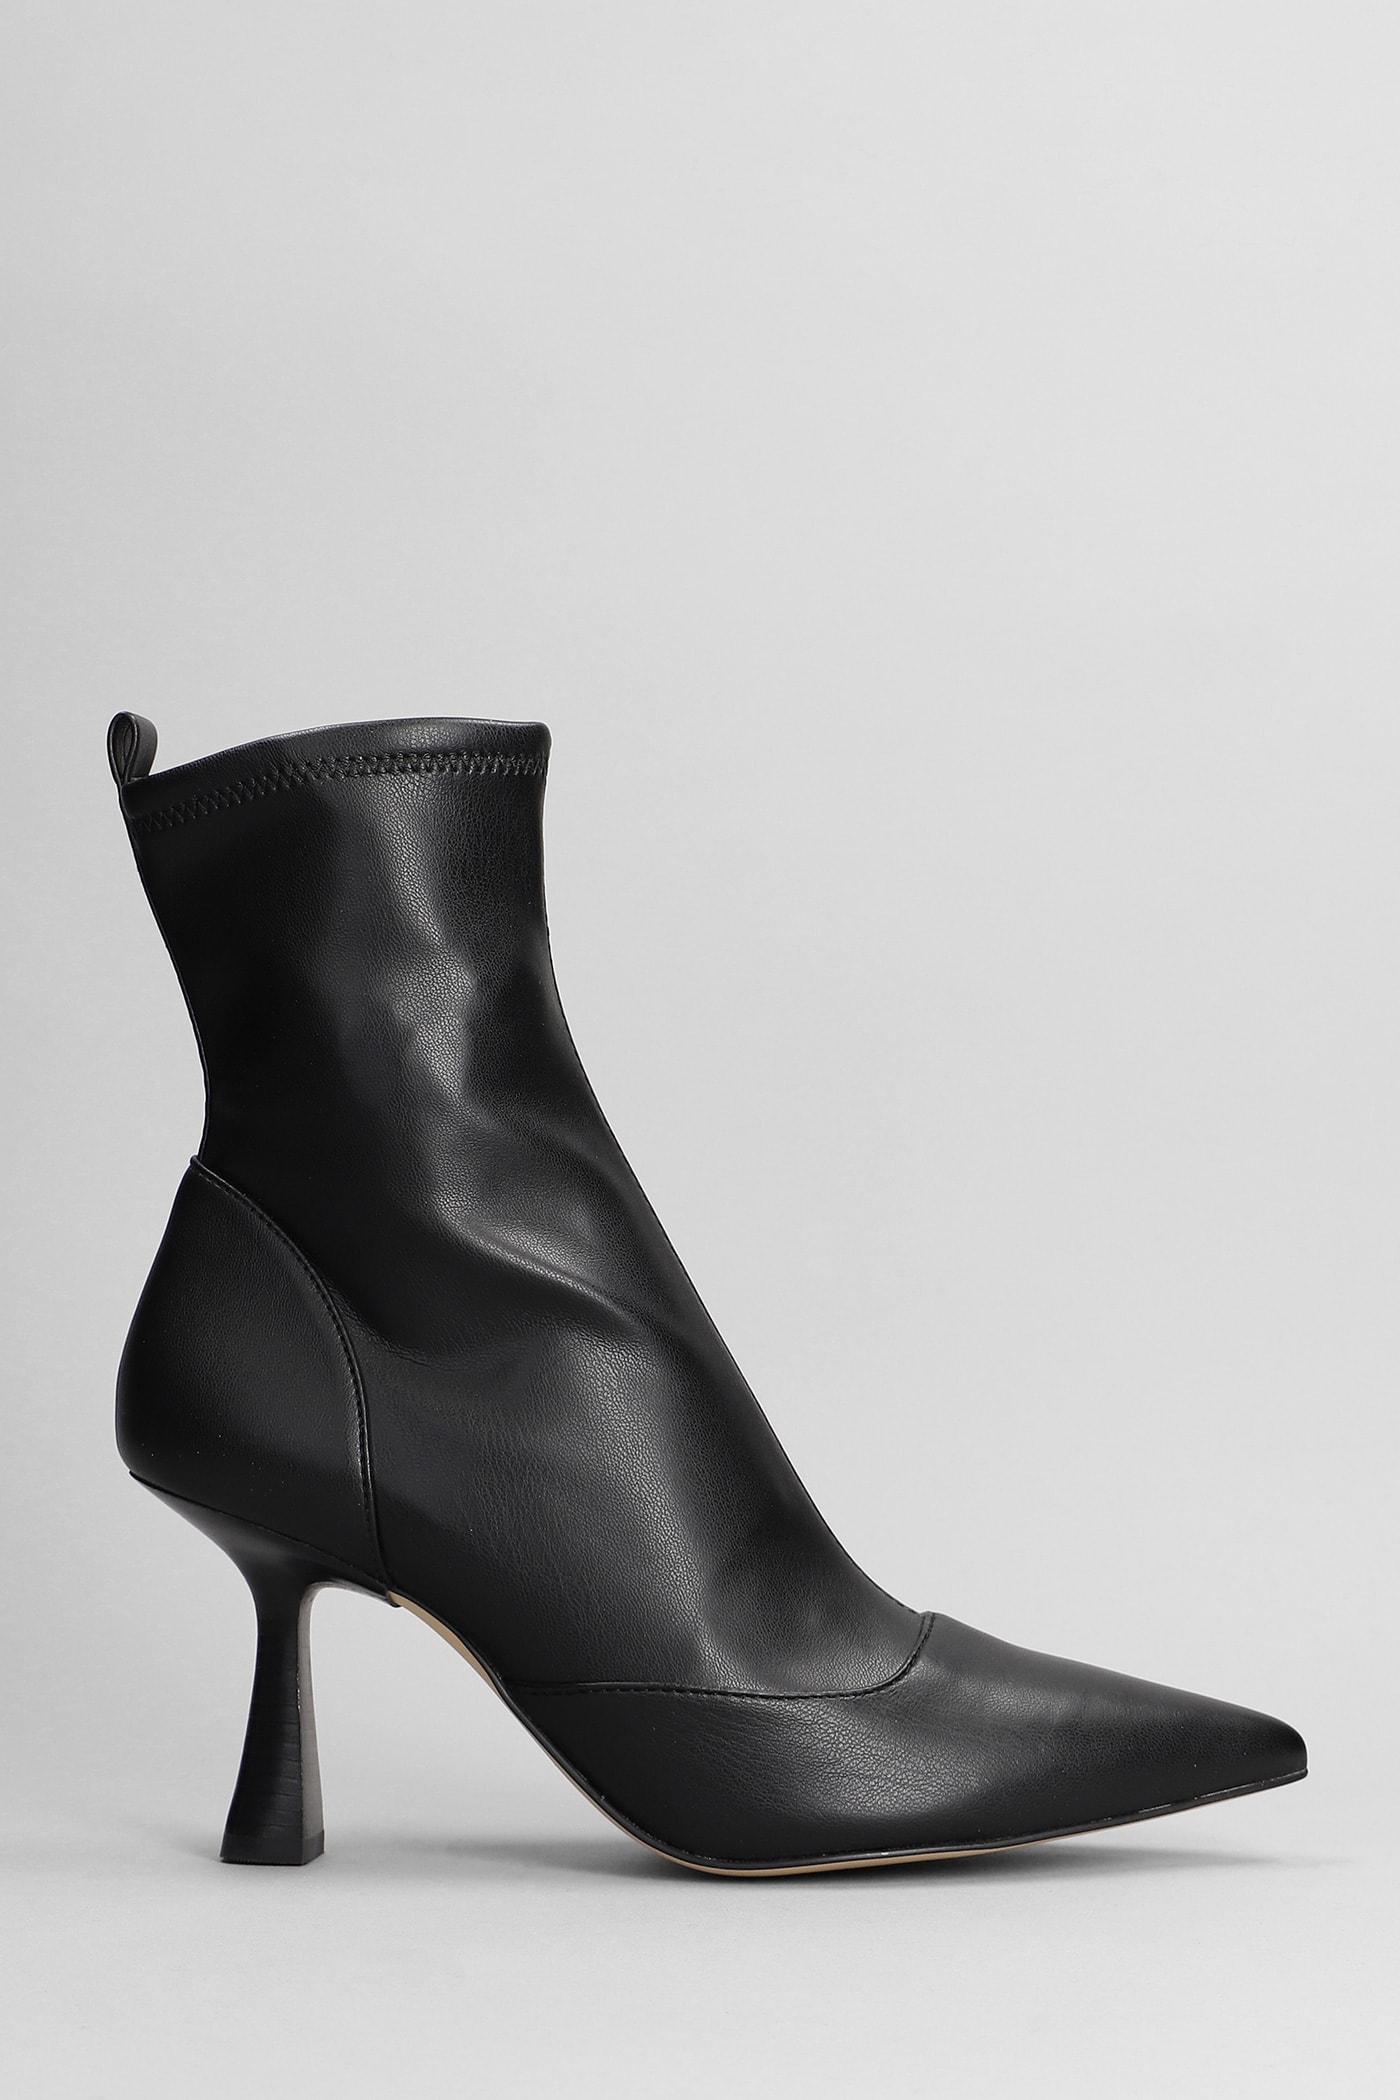 MICHAEL KORS CLARA HIGH HEELS ANKLE BOOTS IN BLACK LEATHER